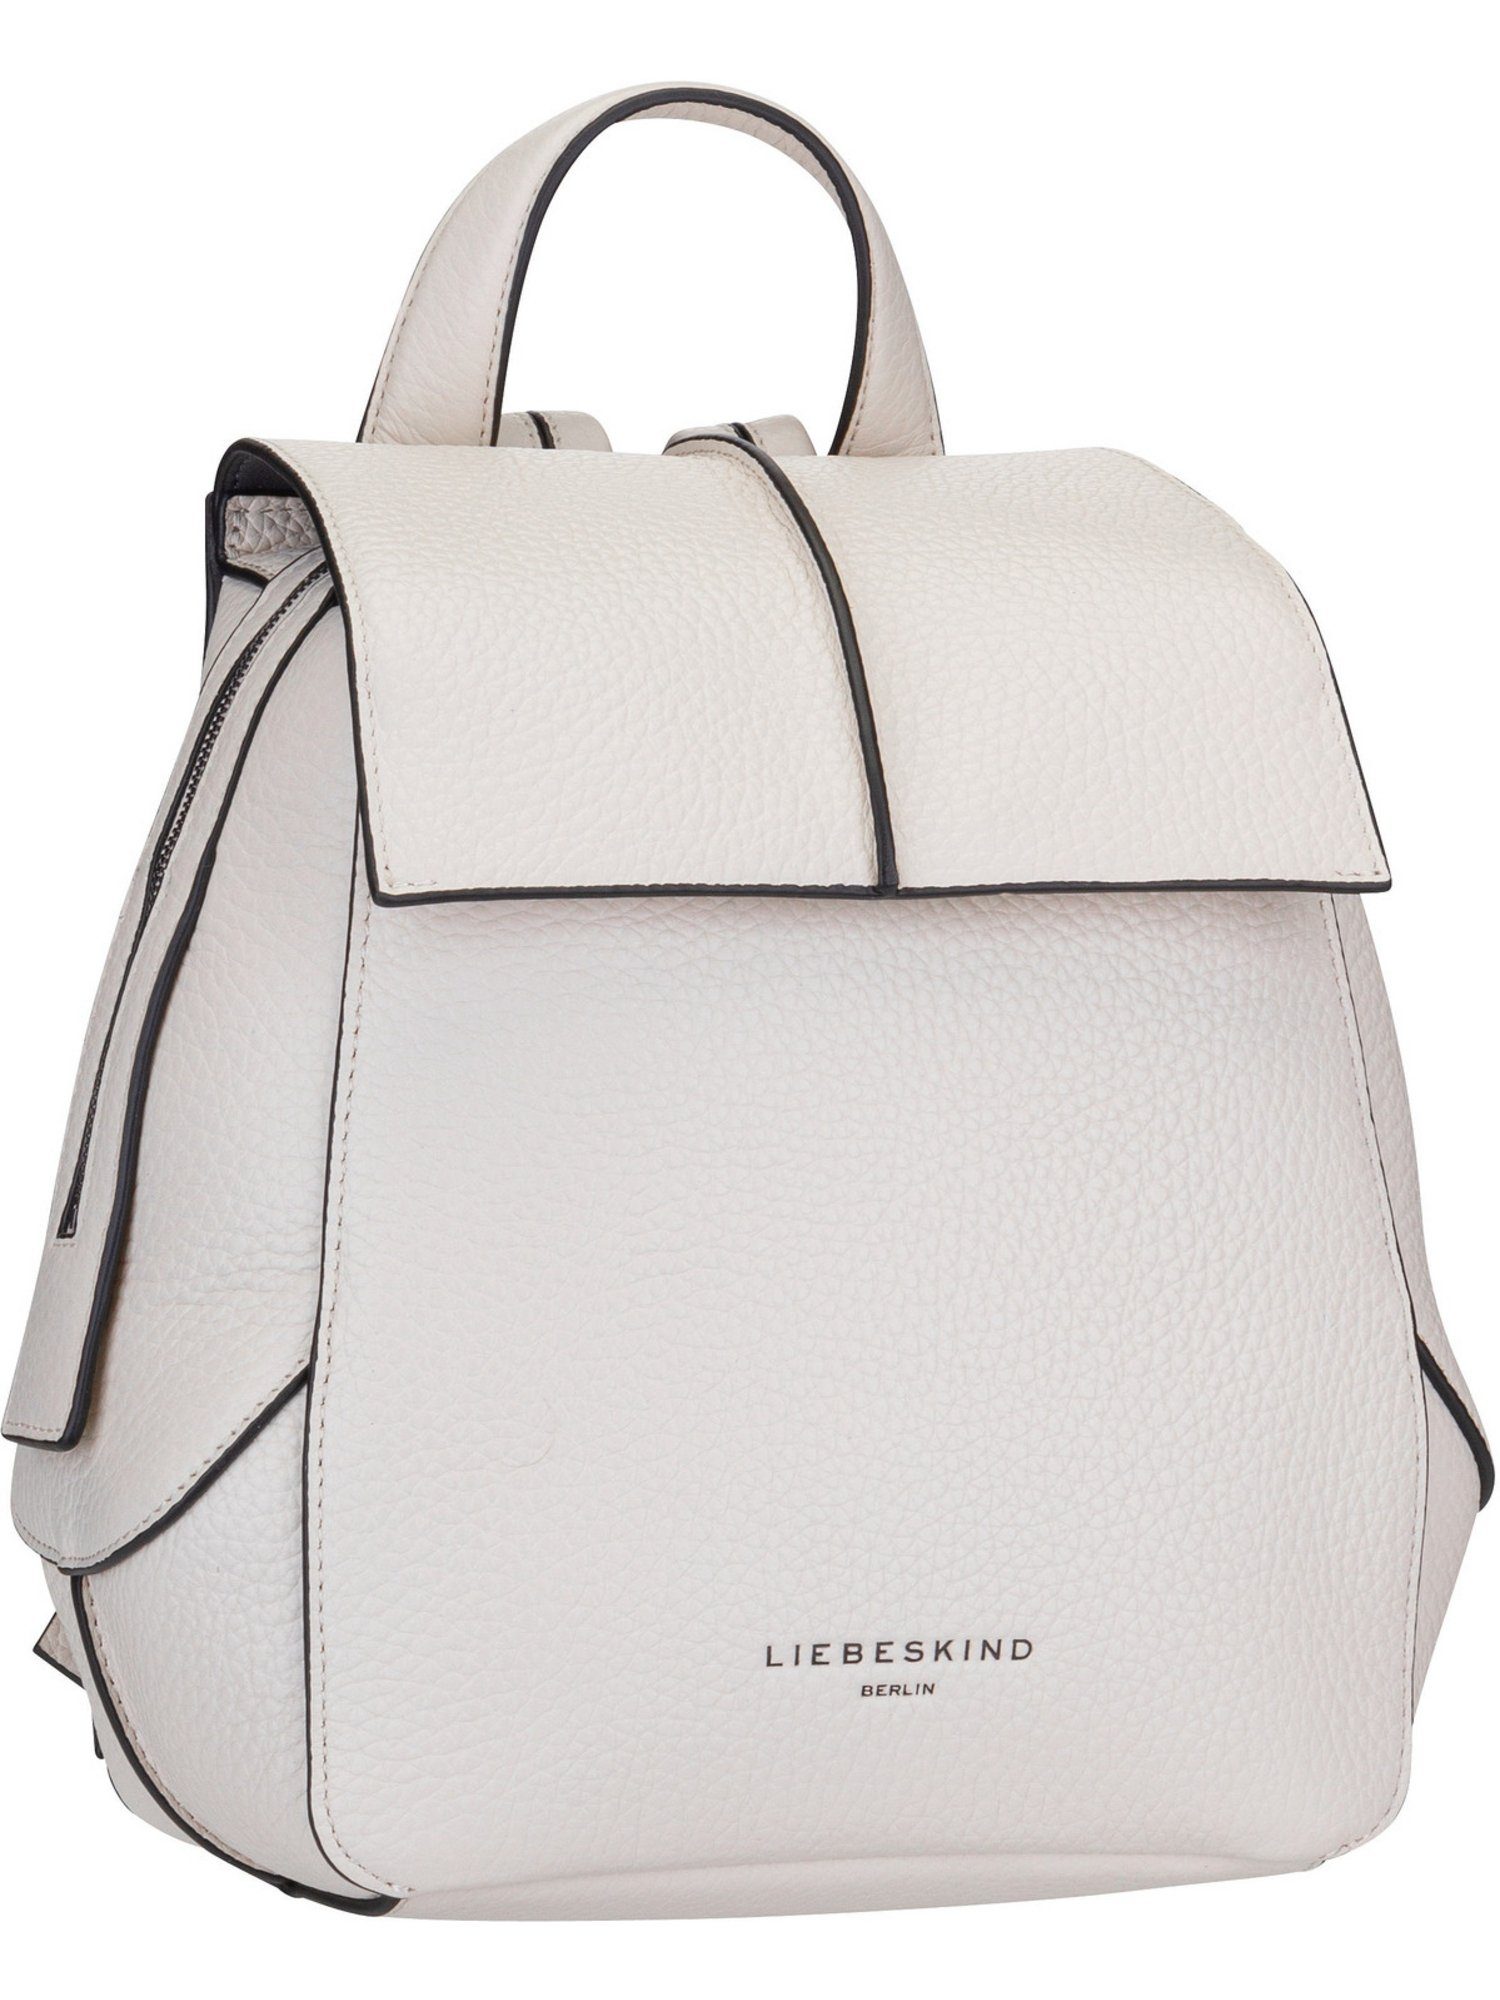 Coconut 2 Berlin Liebeskind Rucksack Backpack S Lilly Pebble